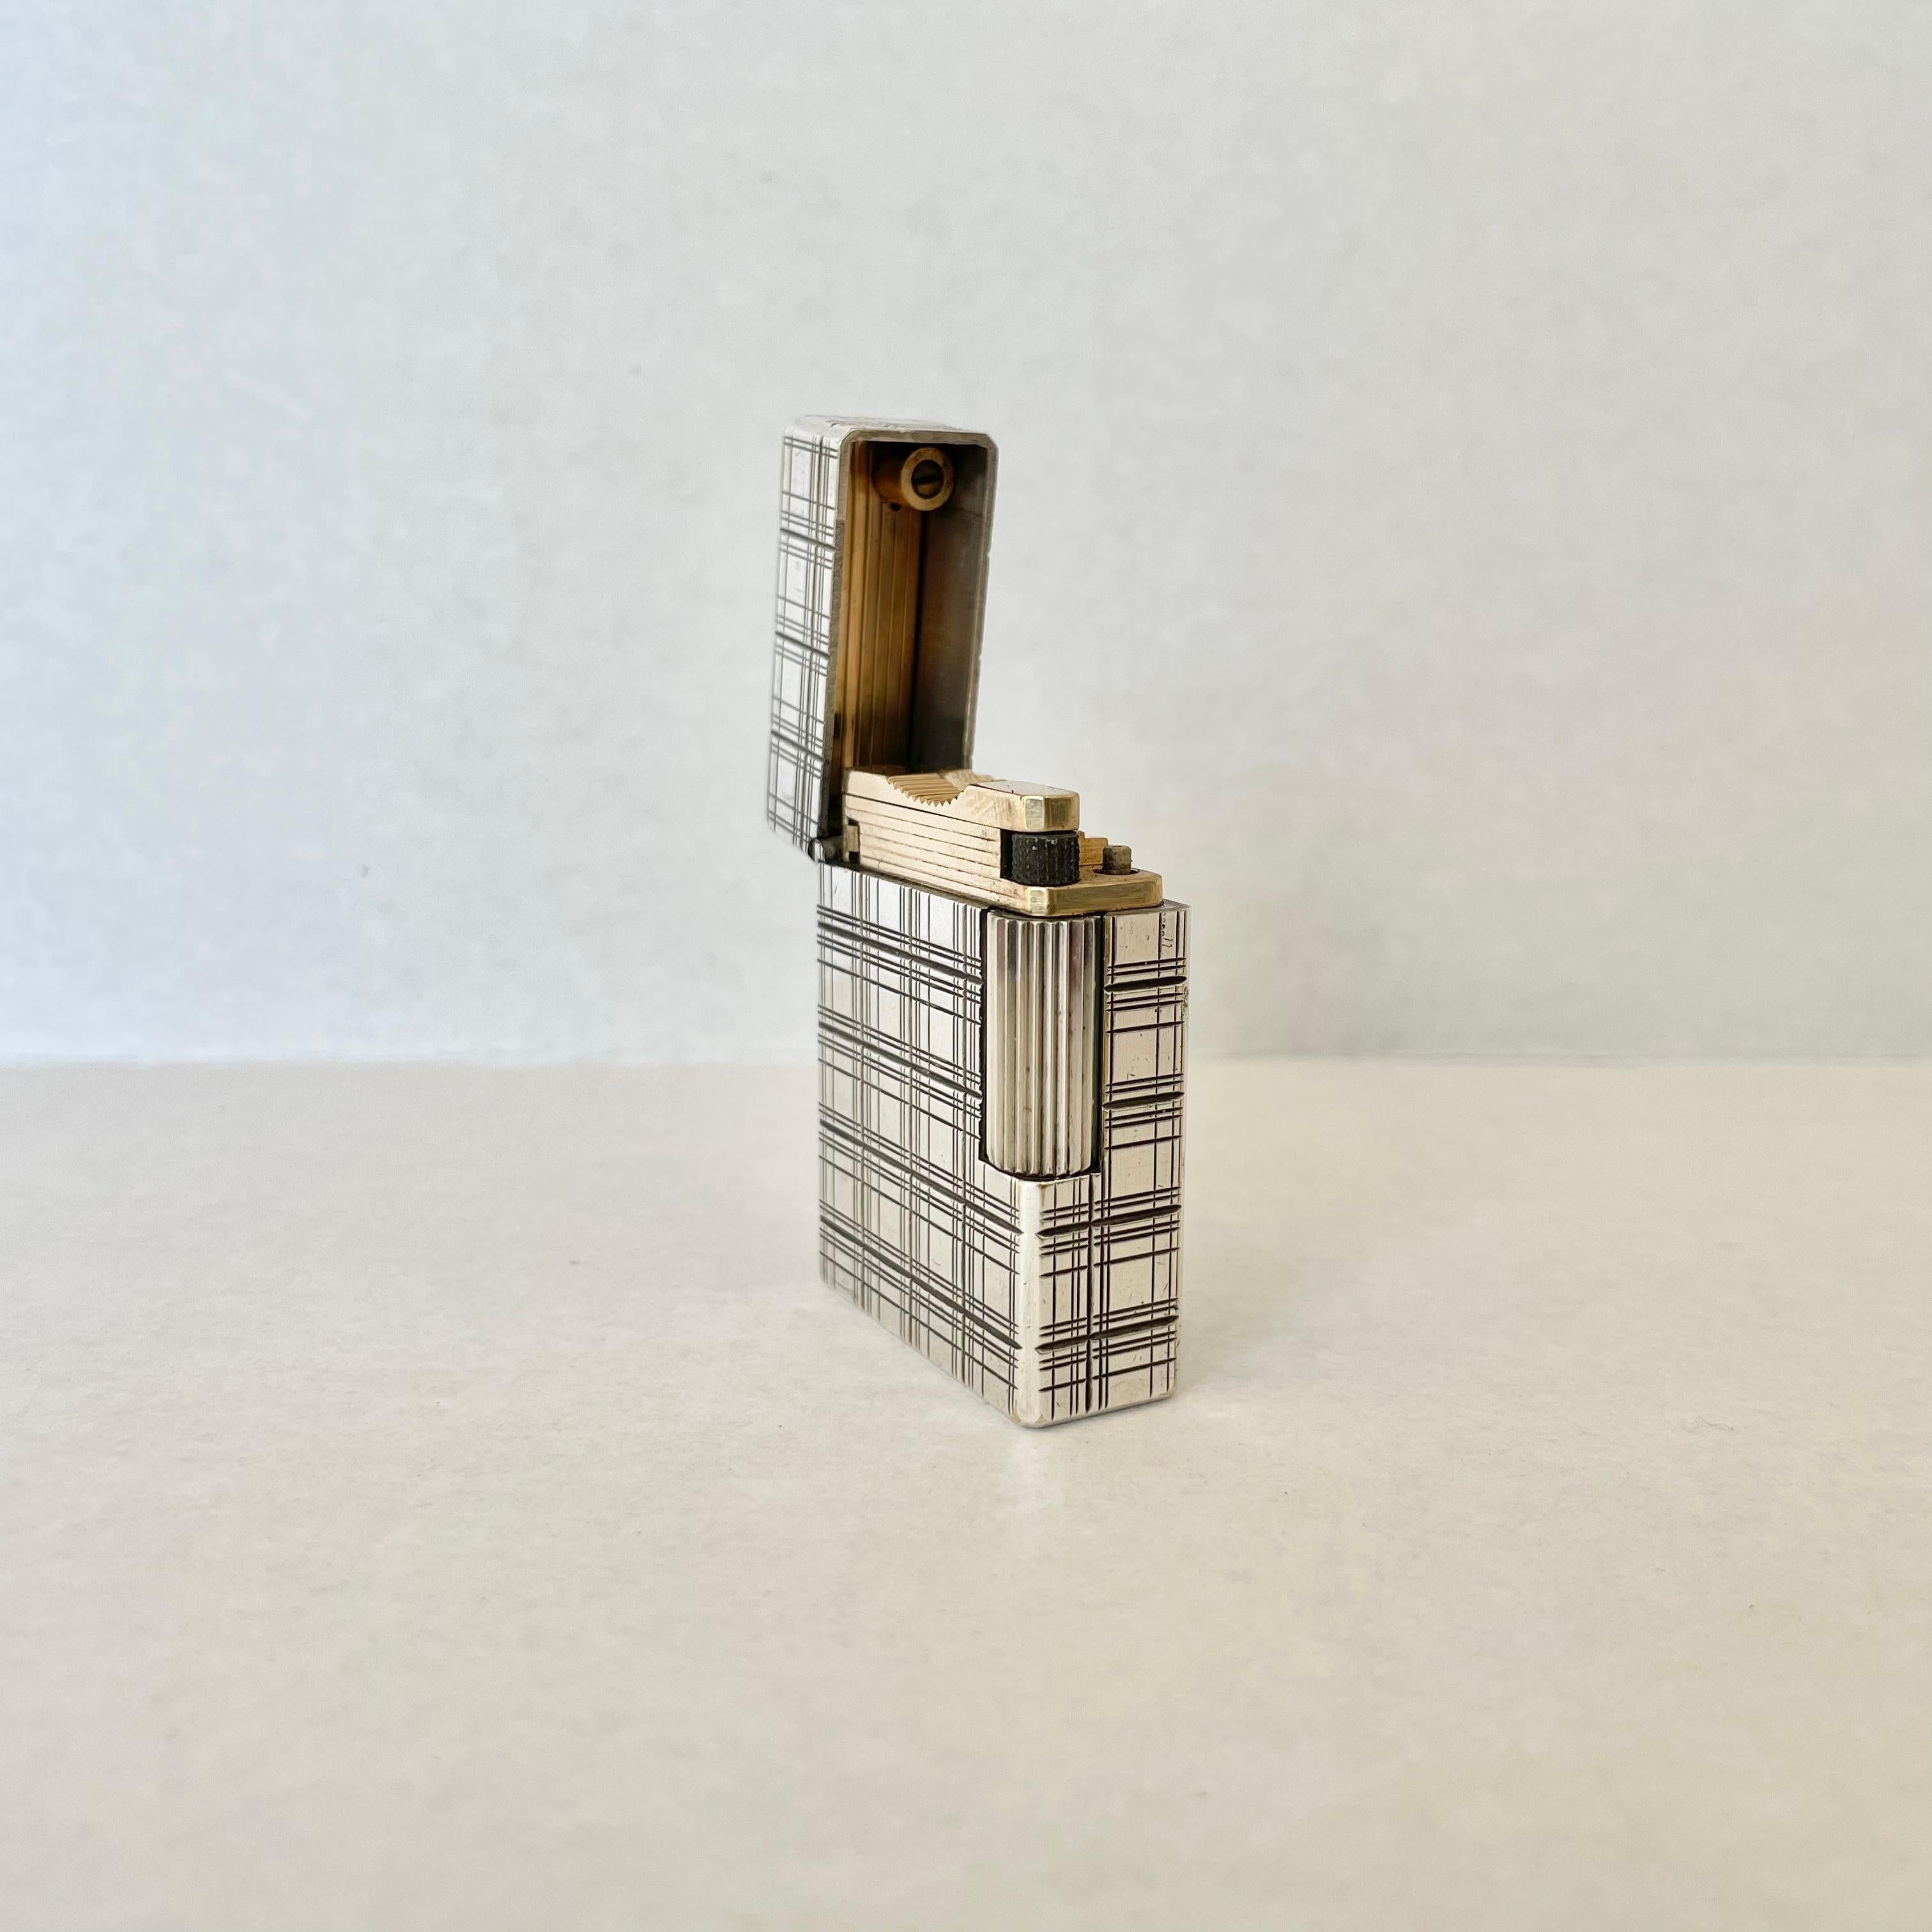 Elegant Dupont Lighter made for Hermes in the 60s. Perfectly joined heavy metal casing with brass lighting mechanism. Plaid windowpane design engraved on exterior with a blackened patina giving this piece great texture. 